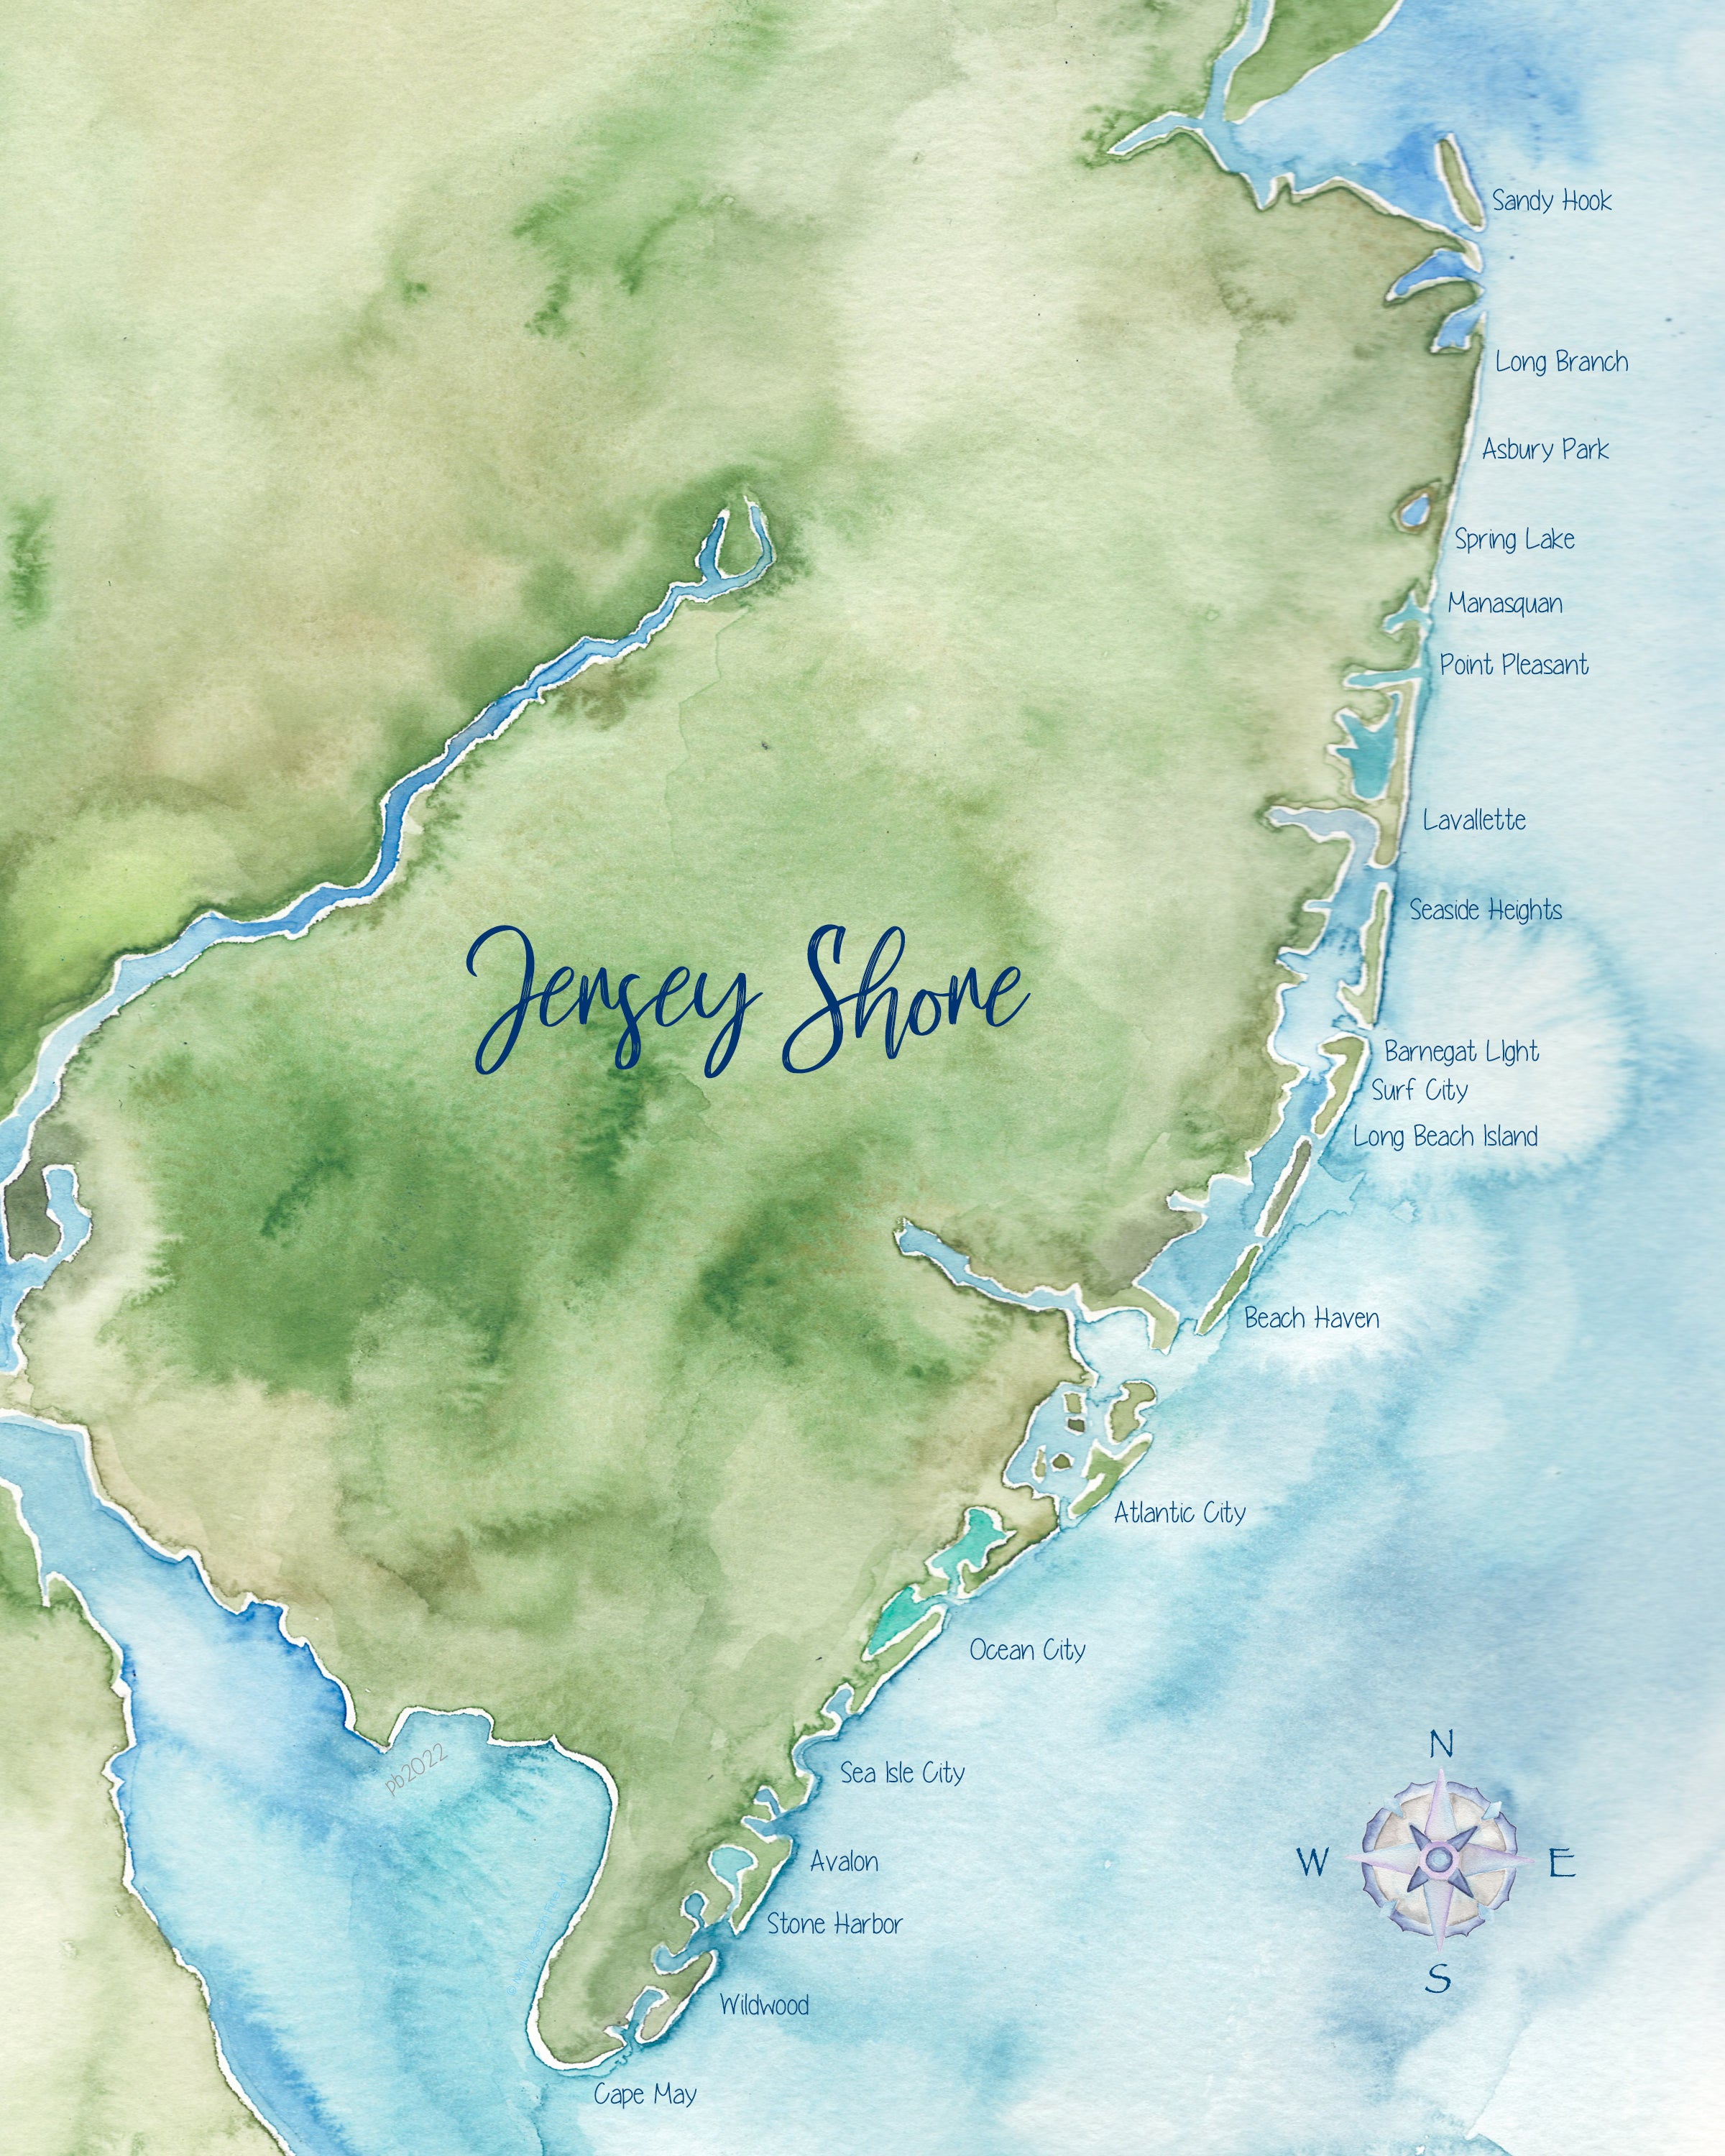 Maps of the New Jersey Shore